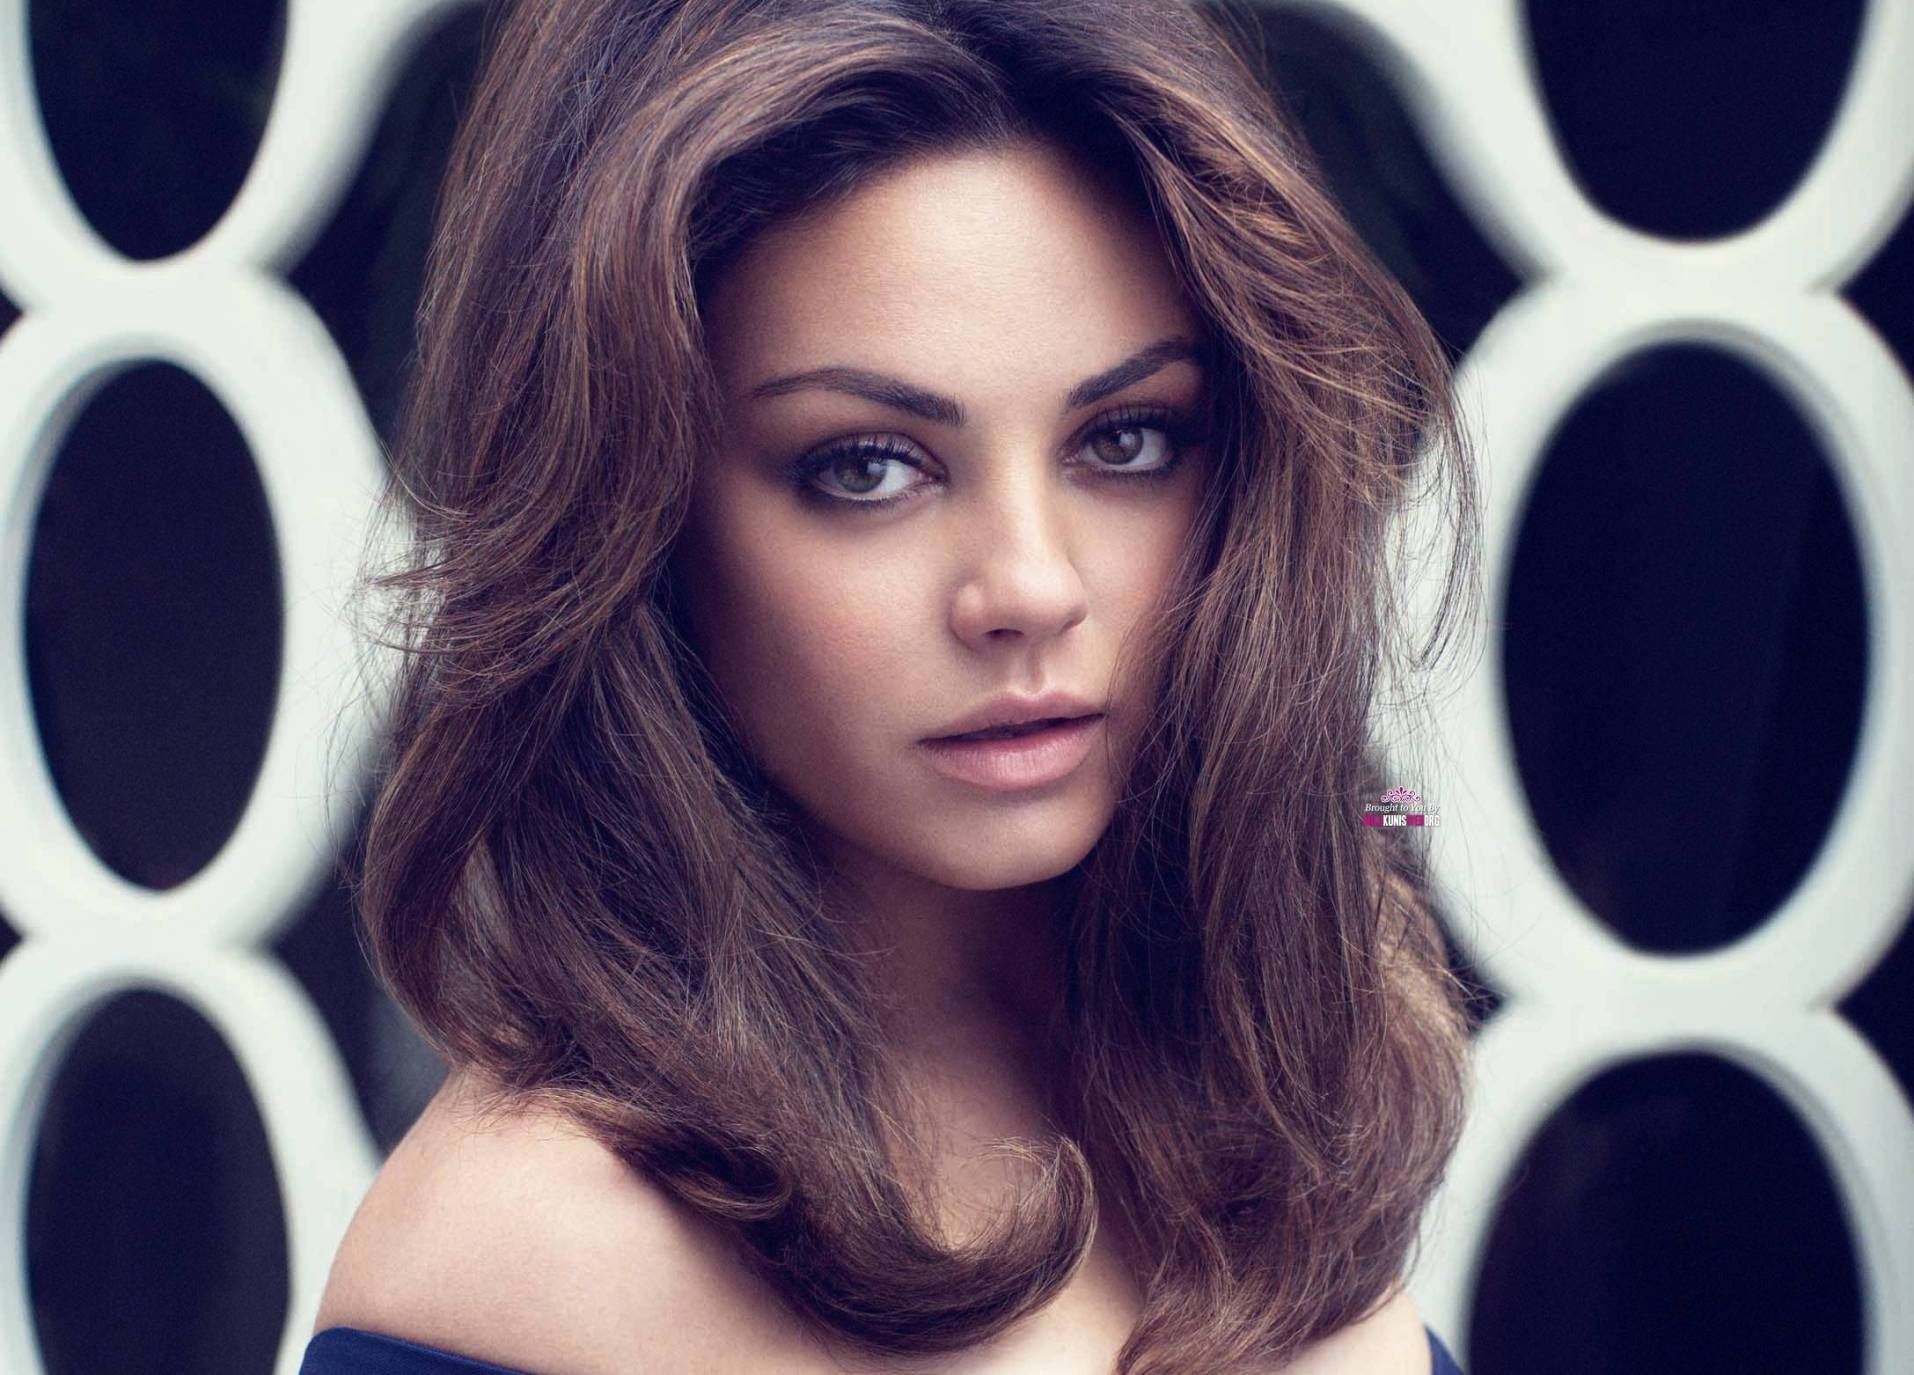 🔥 #mila kunis HD Photos & Wallpapers (675+ Images) - Page: 40